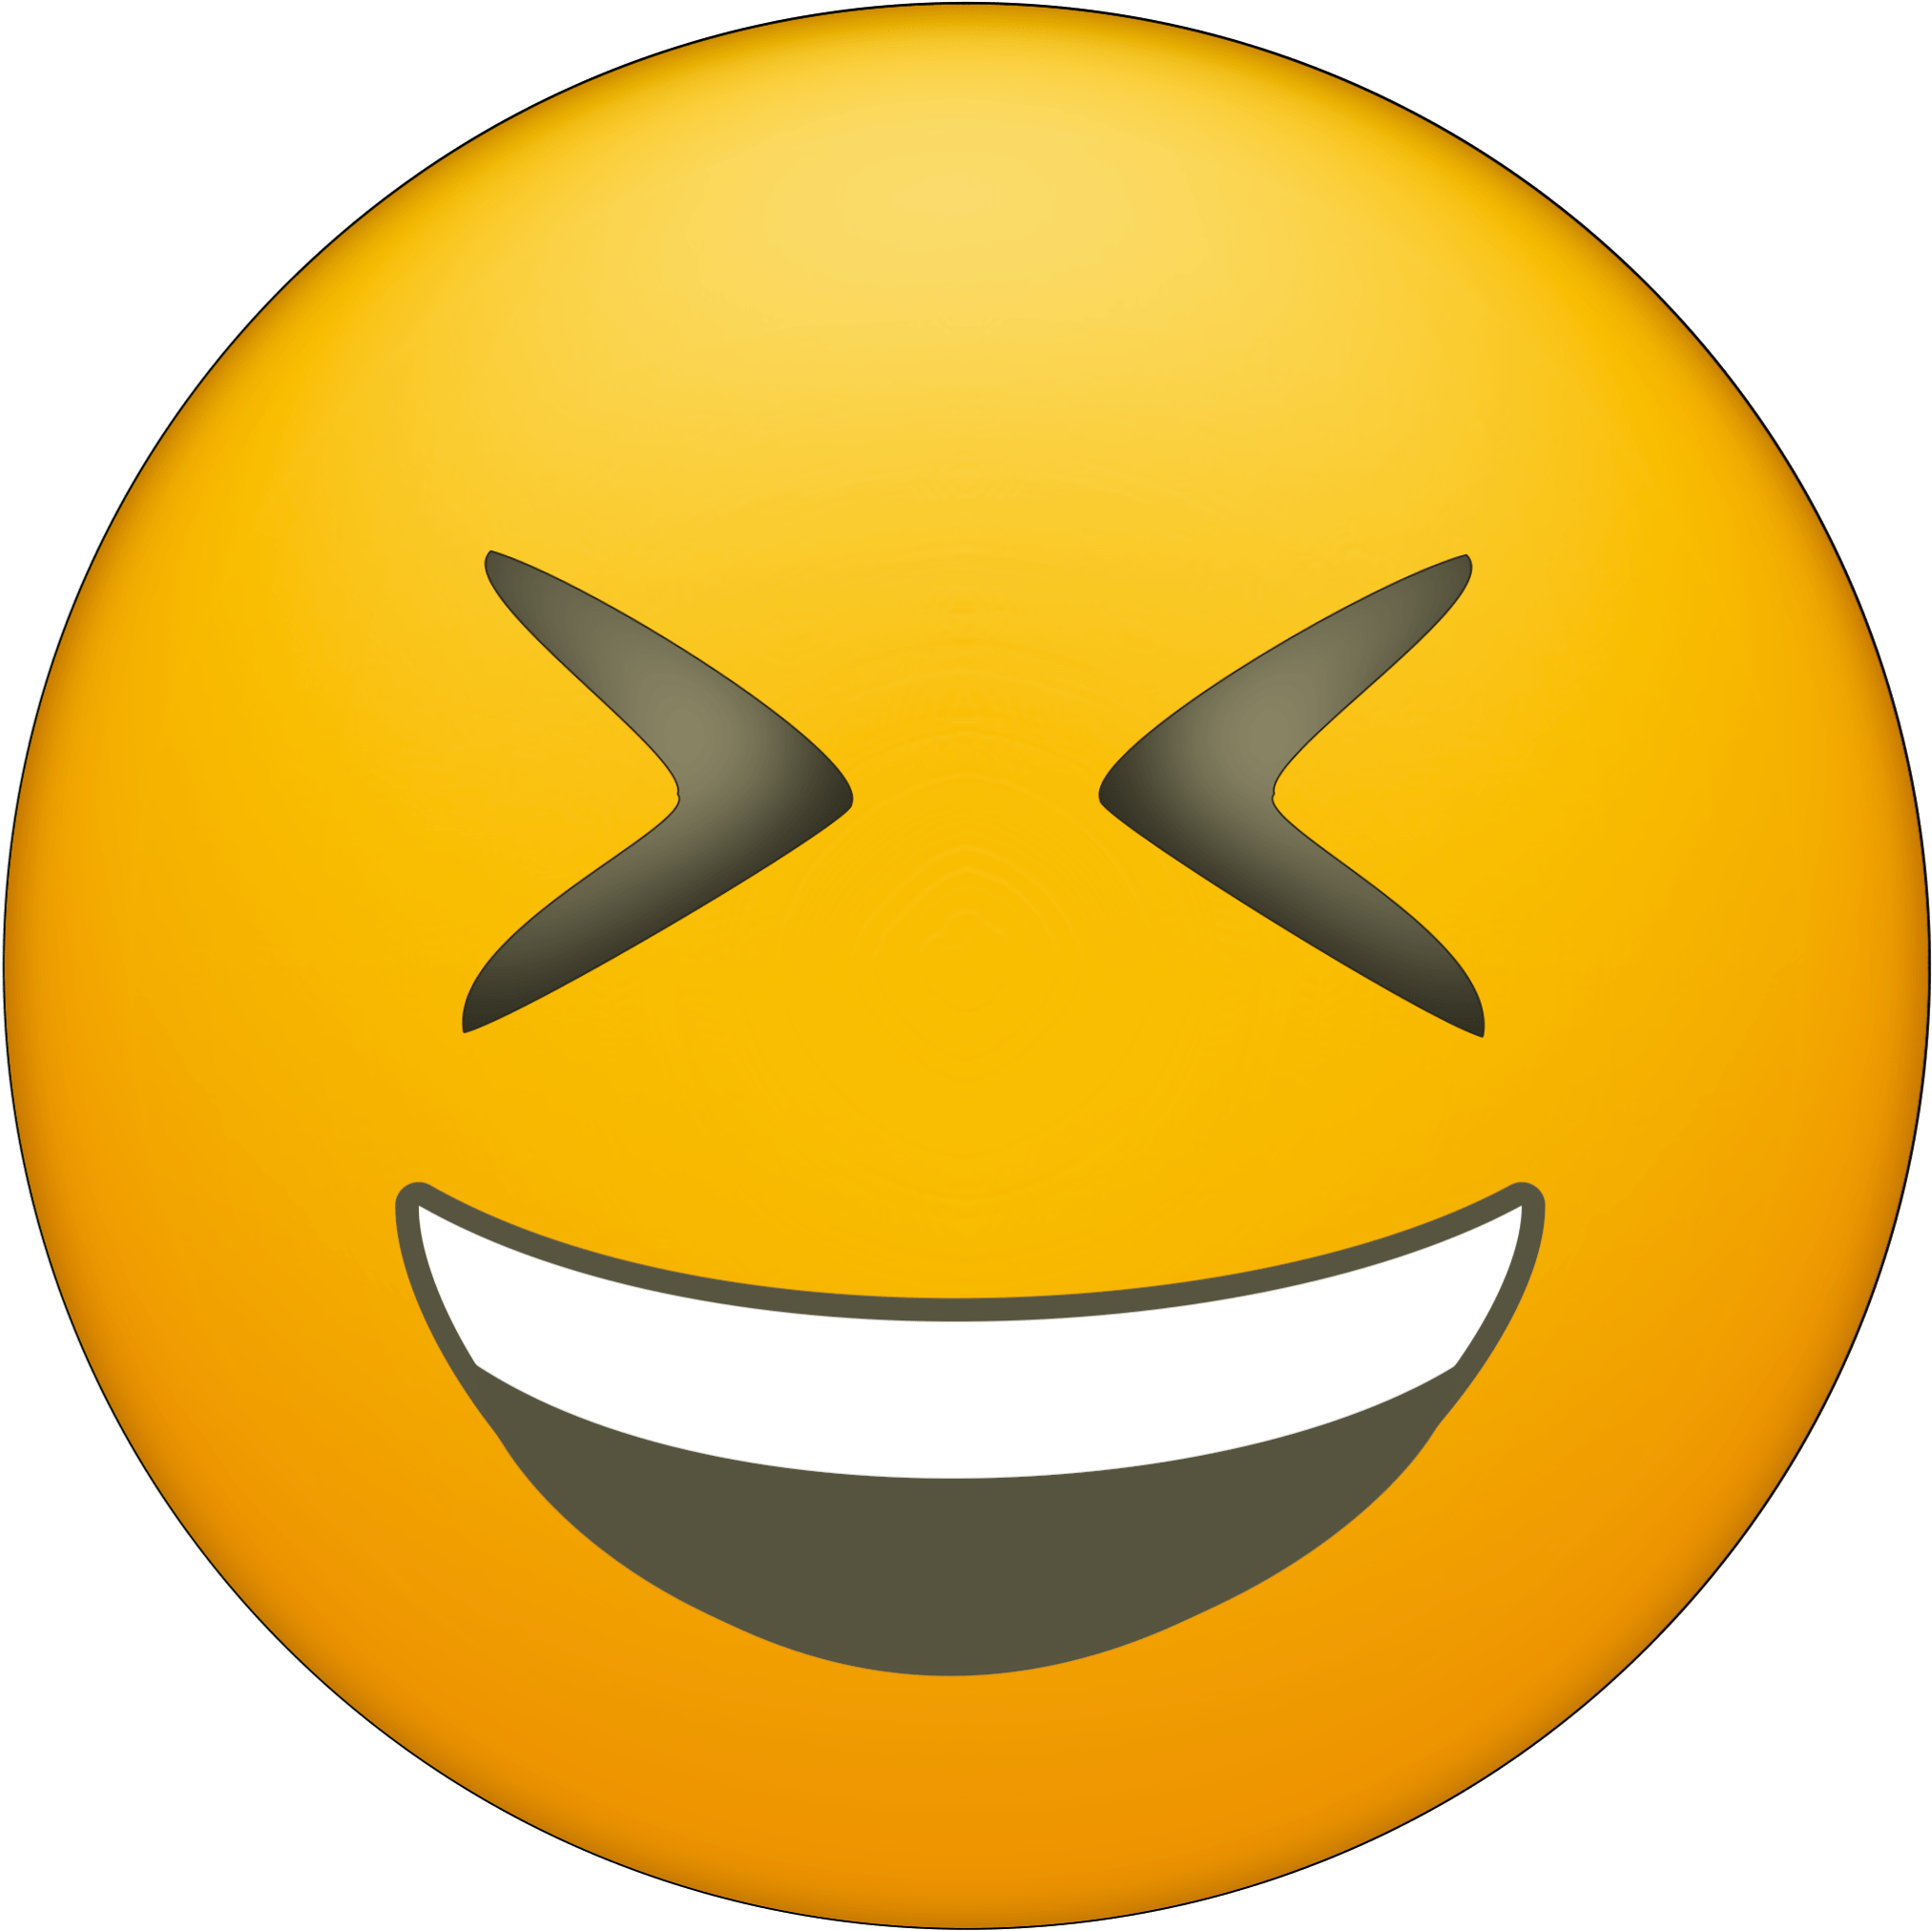 Click The Following Links To Print The Emoji Faces - Excited Emoji Face (2083x2083)